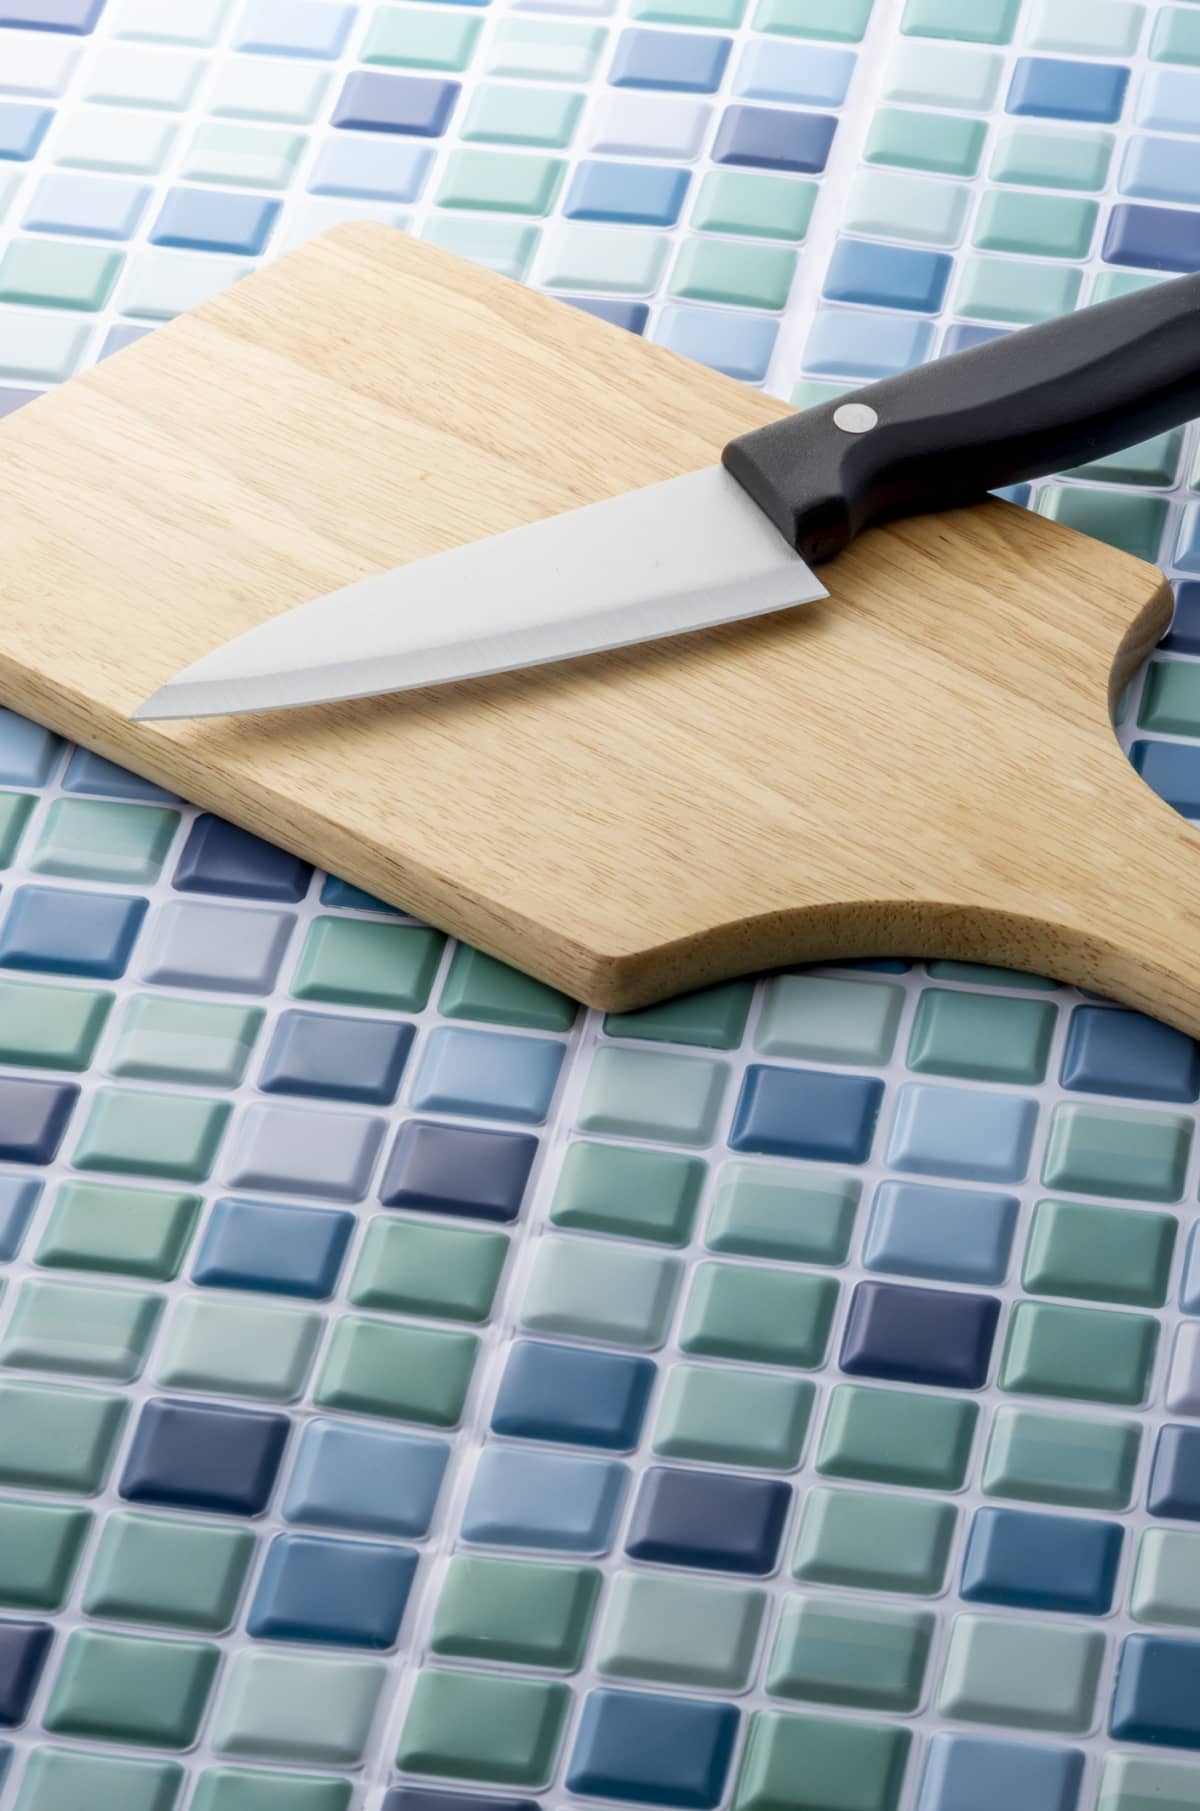 A knife on top of a cutting board